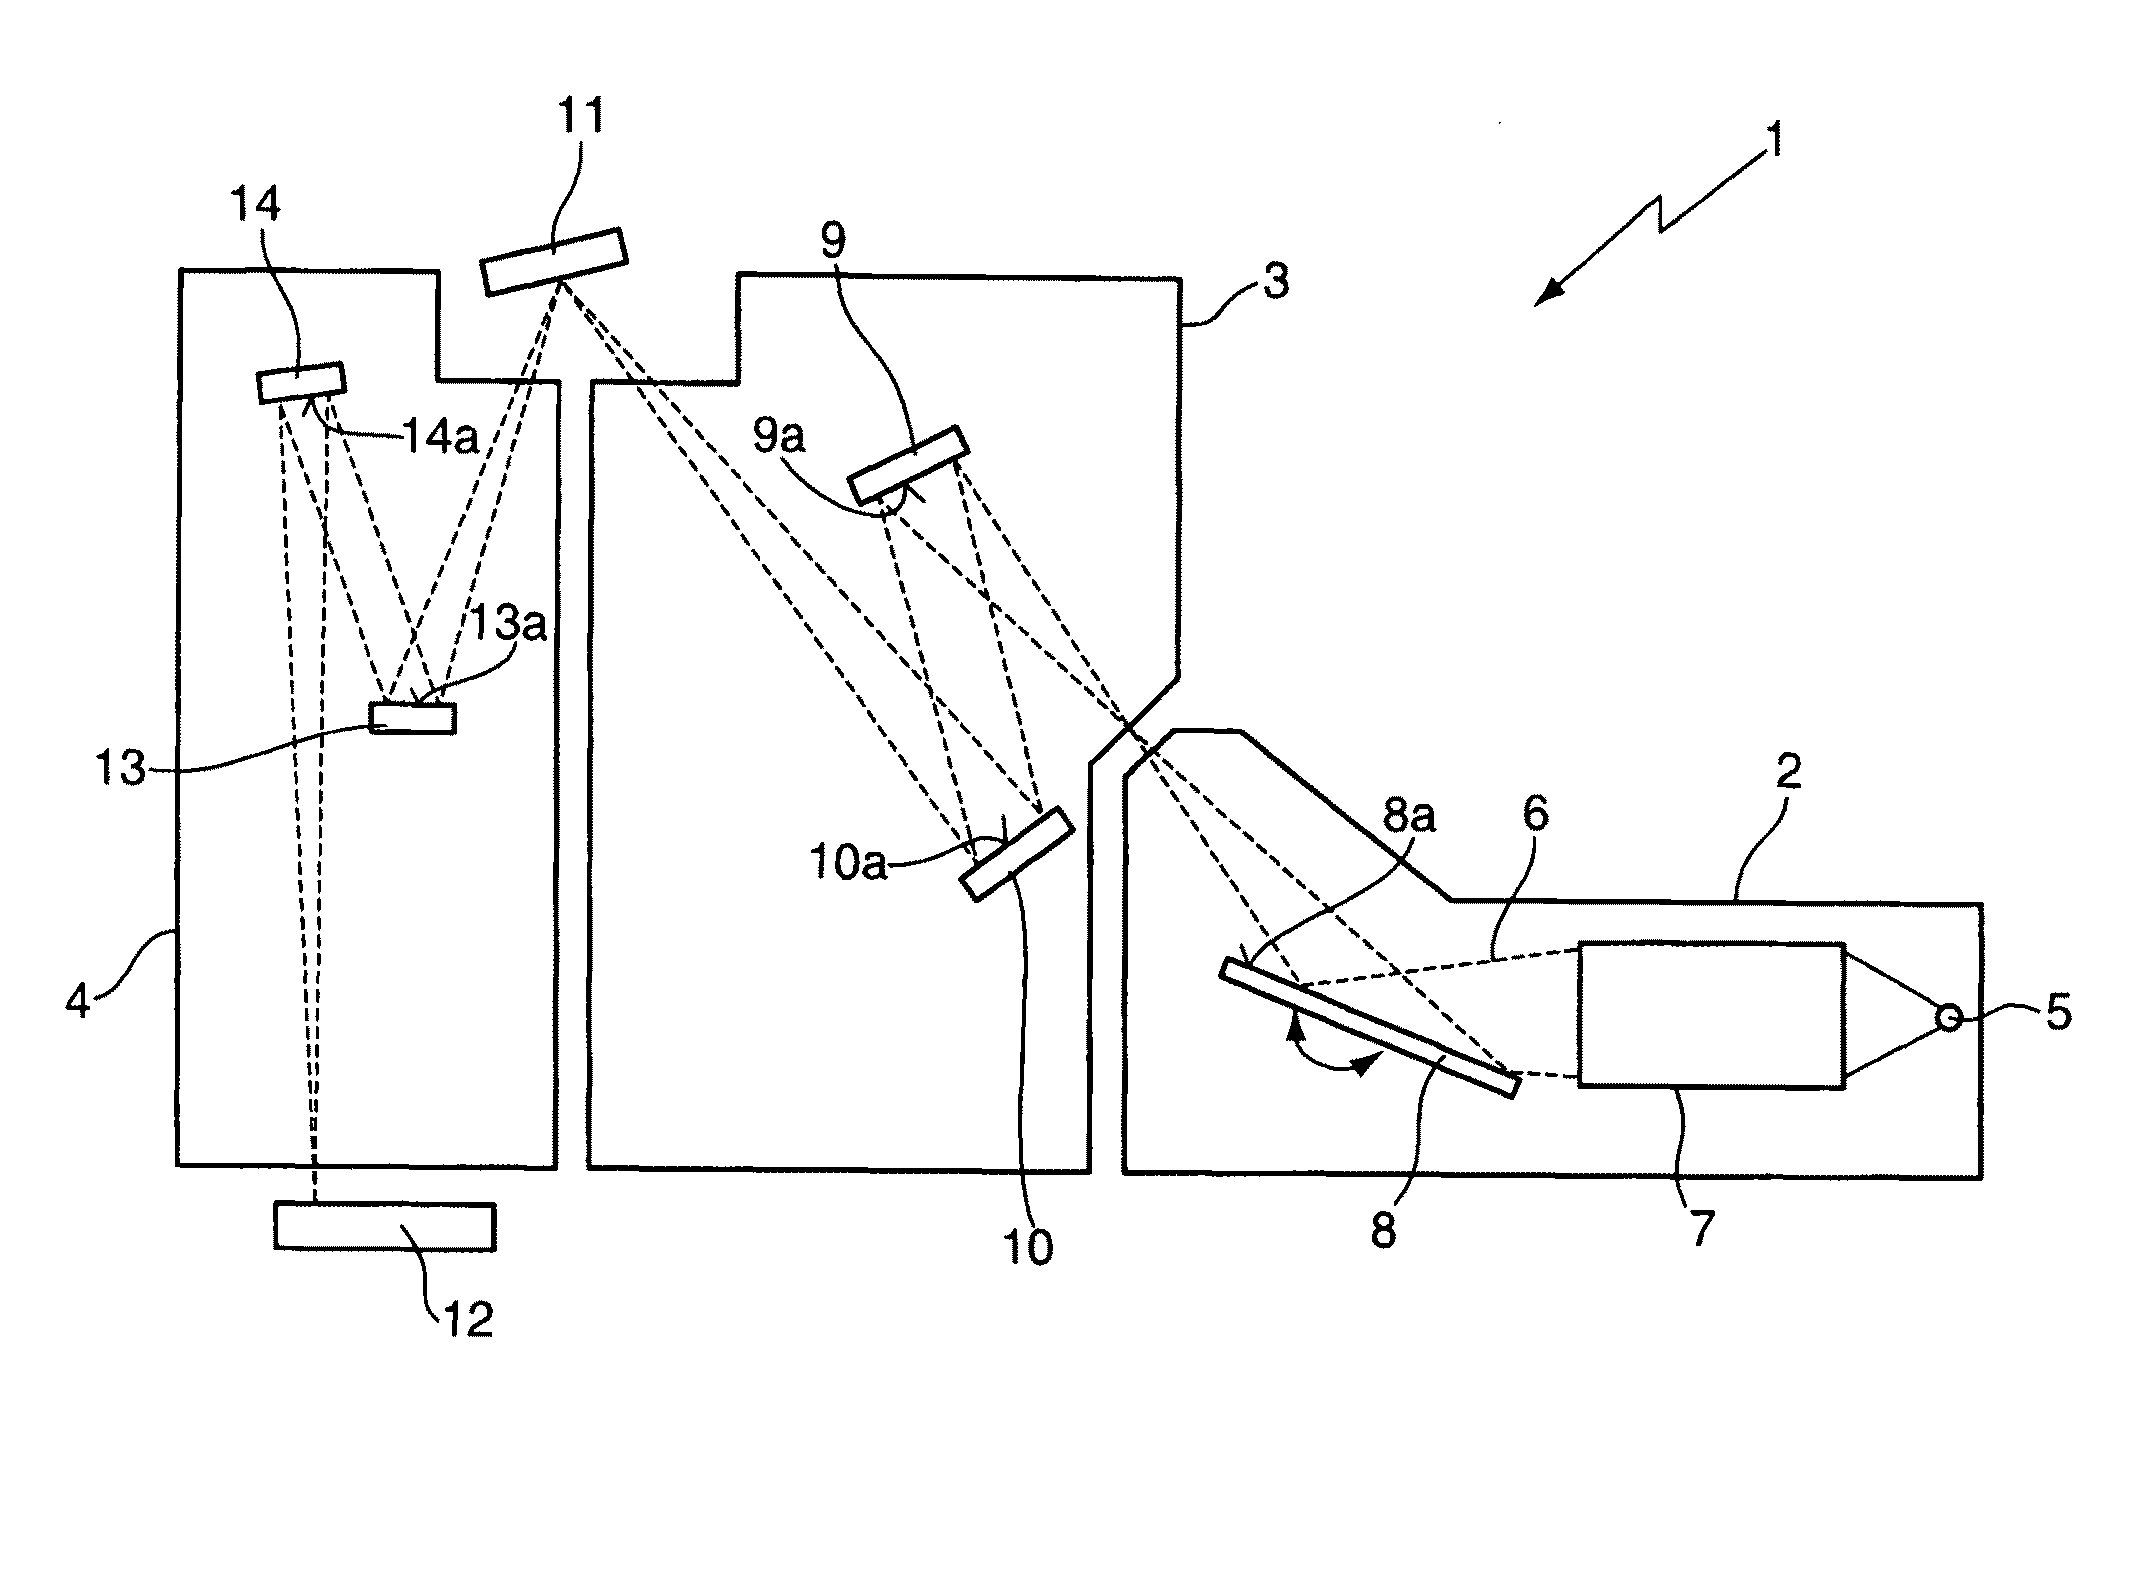 Method for removing a contamination layer from an optical surface and arrangement therefor as well as a method for generating a cleaning gas and arrangement therefor